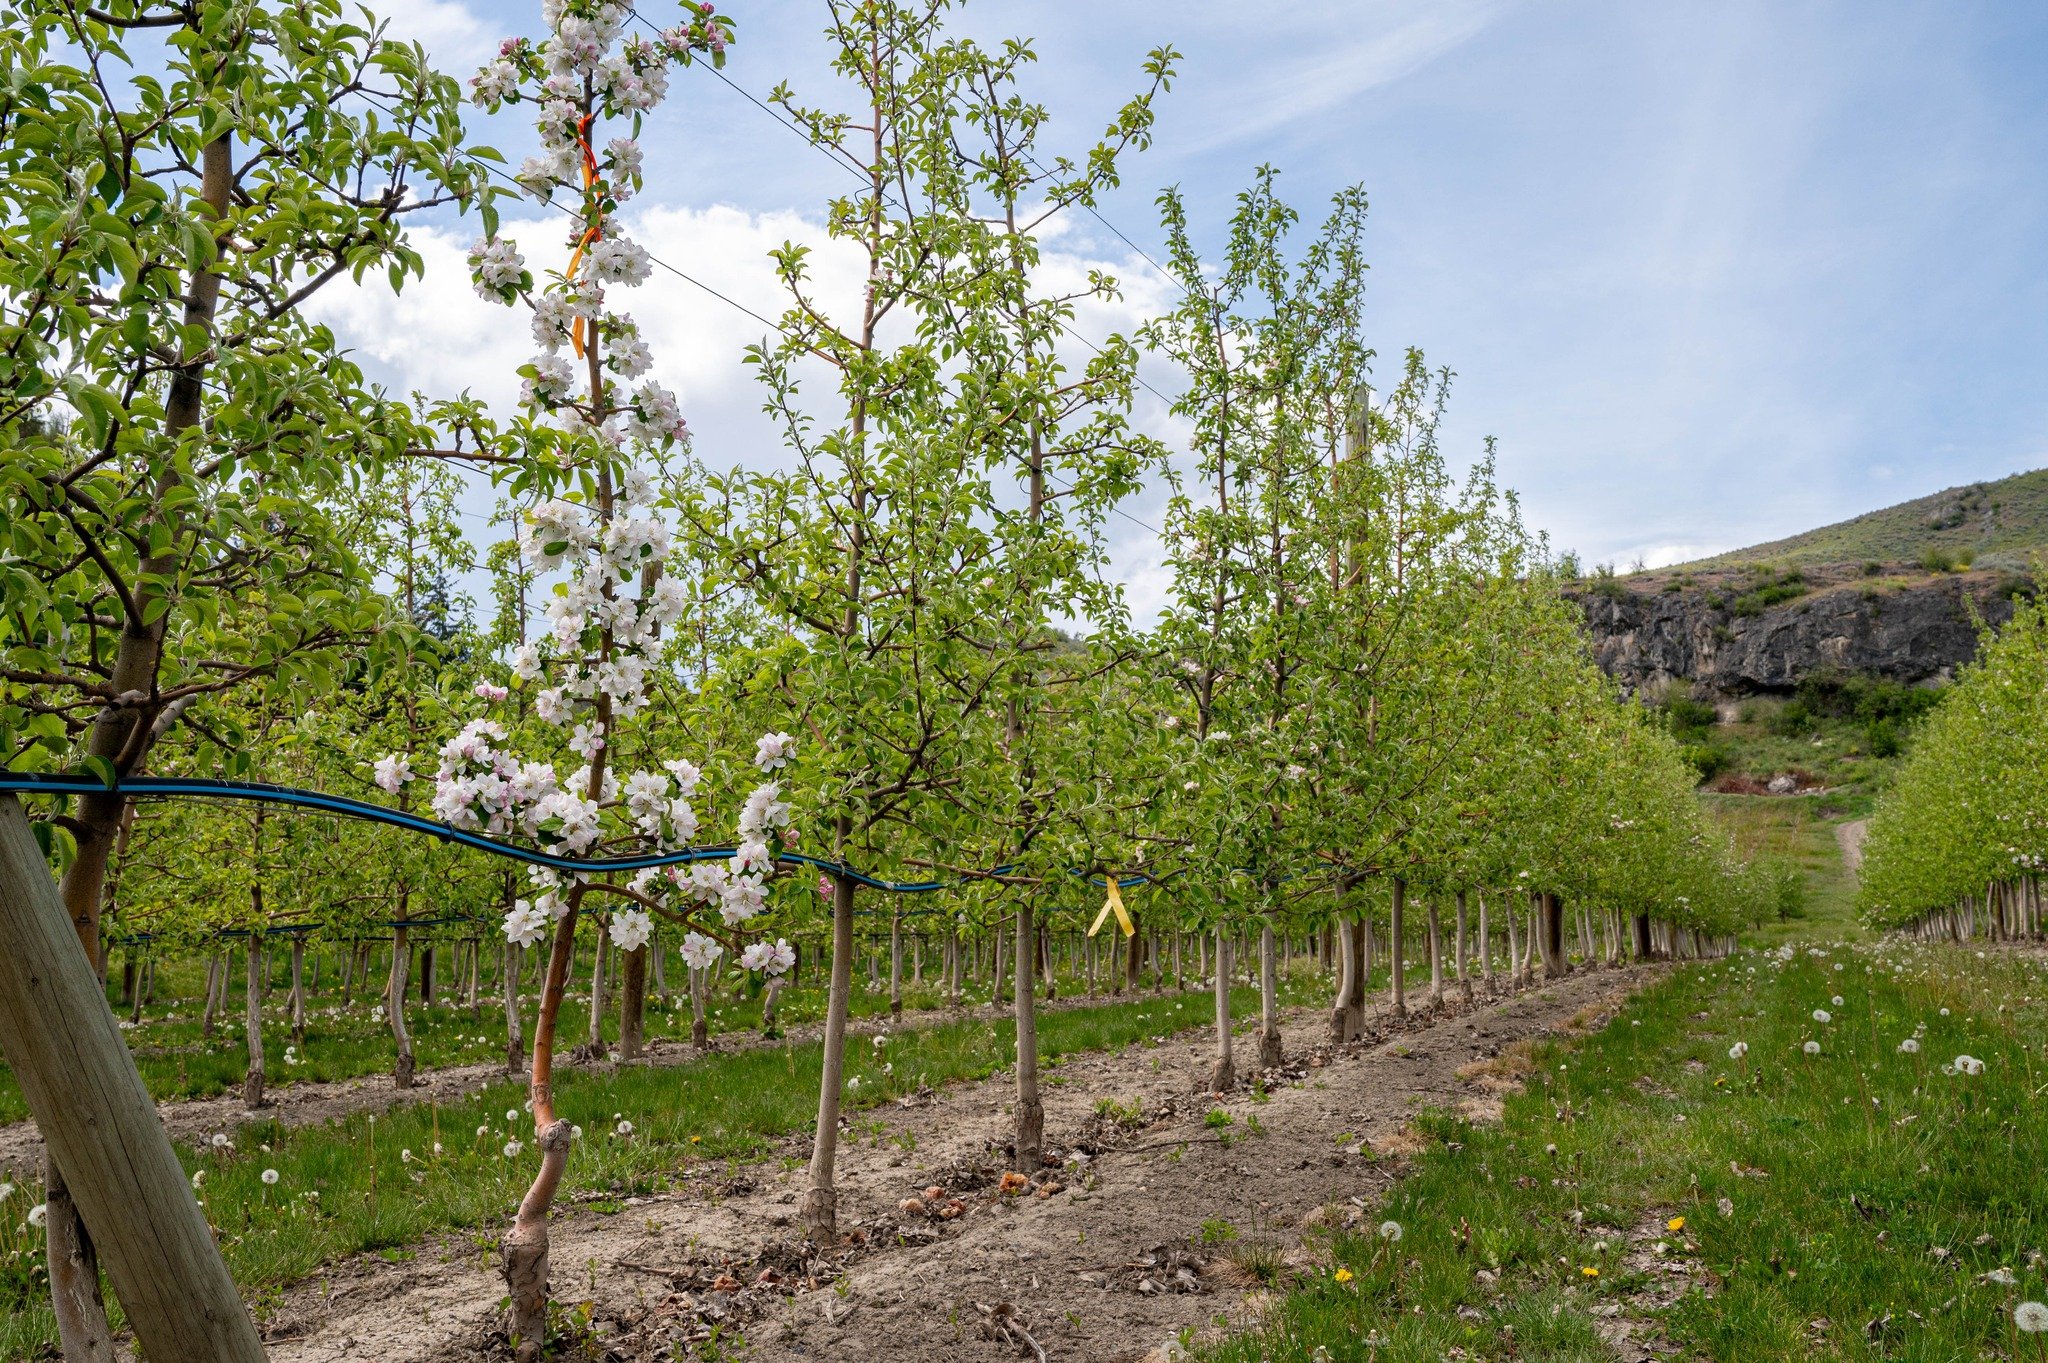 Have you noticed how in a row of fruit trees there are a couple of them that stand out, that don't look the same?

That's because, in order to help cross-pollination, we provide the bees and other insects with pollen from a different species of fruit